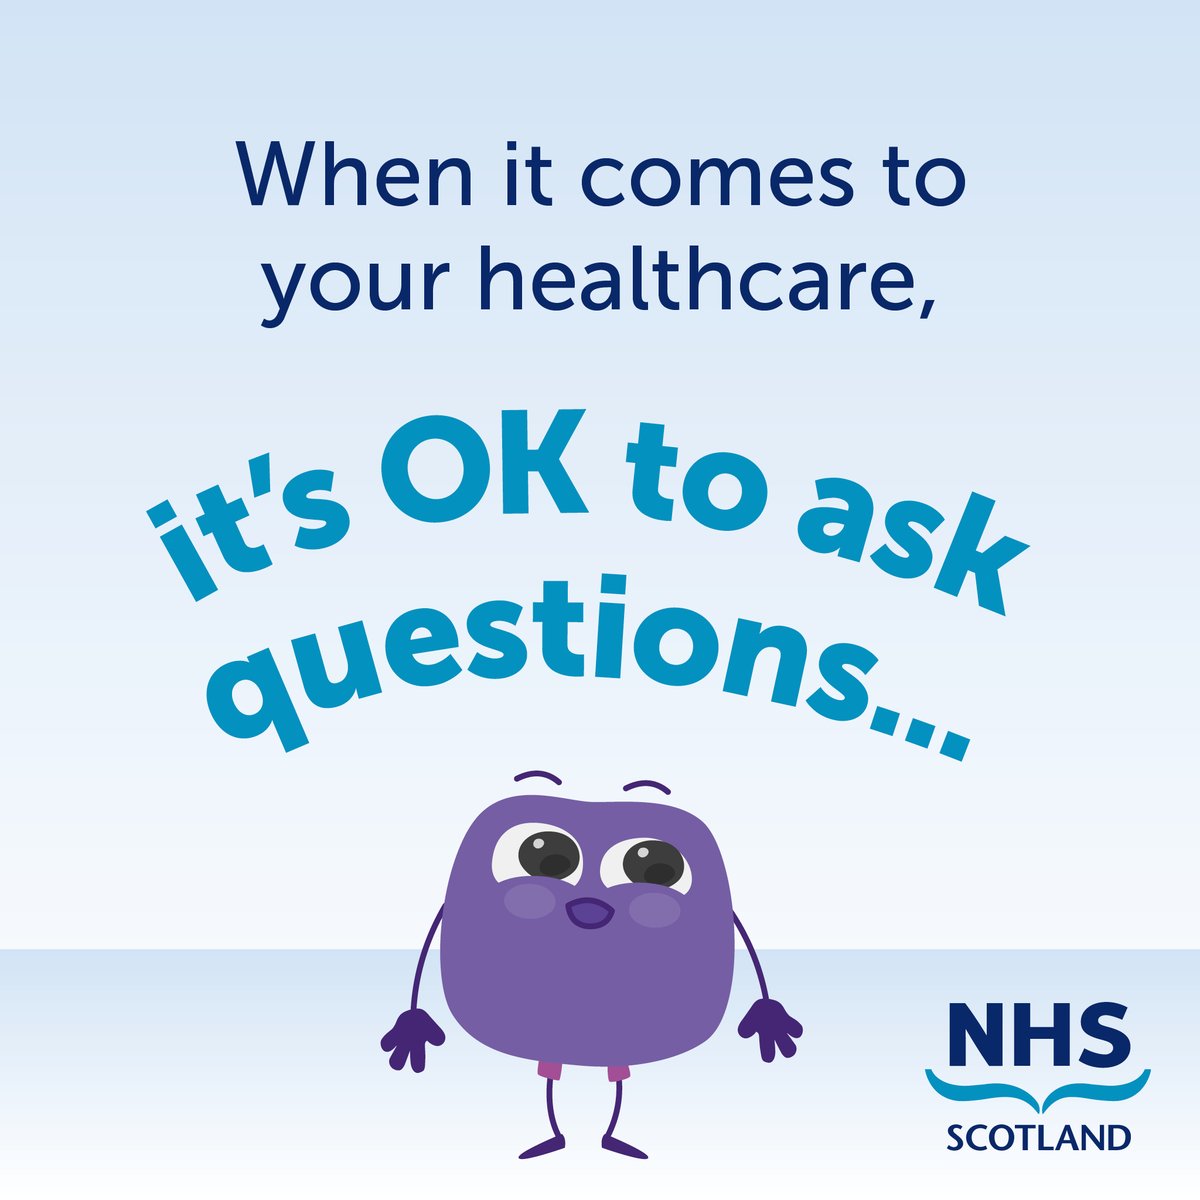 #ItsOKtoAsk! When you understand what's going on with your health, you can make better decisions around your care and treatment. For more info on questions to ask at your next appointment visit👉 nhsinform.scot/its-ok-to-ask